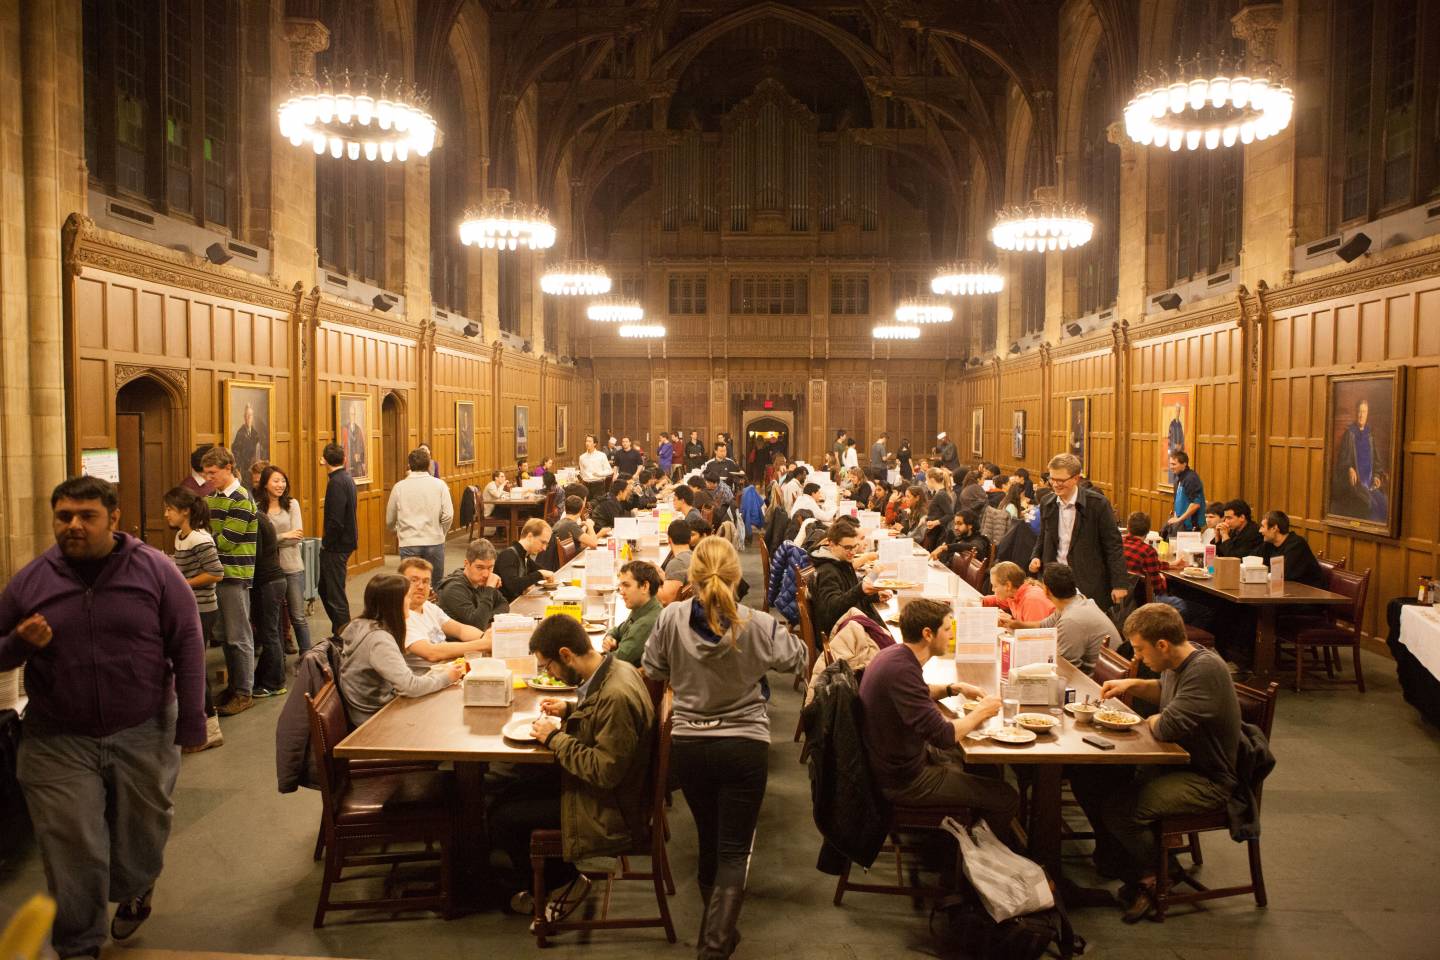 Graduate students eating in Proctor Hall